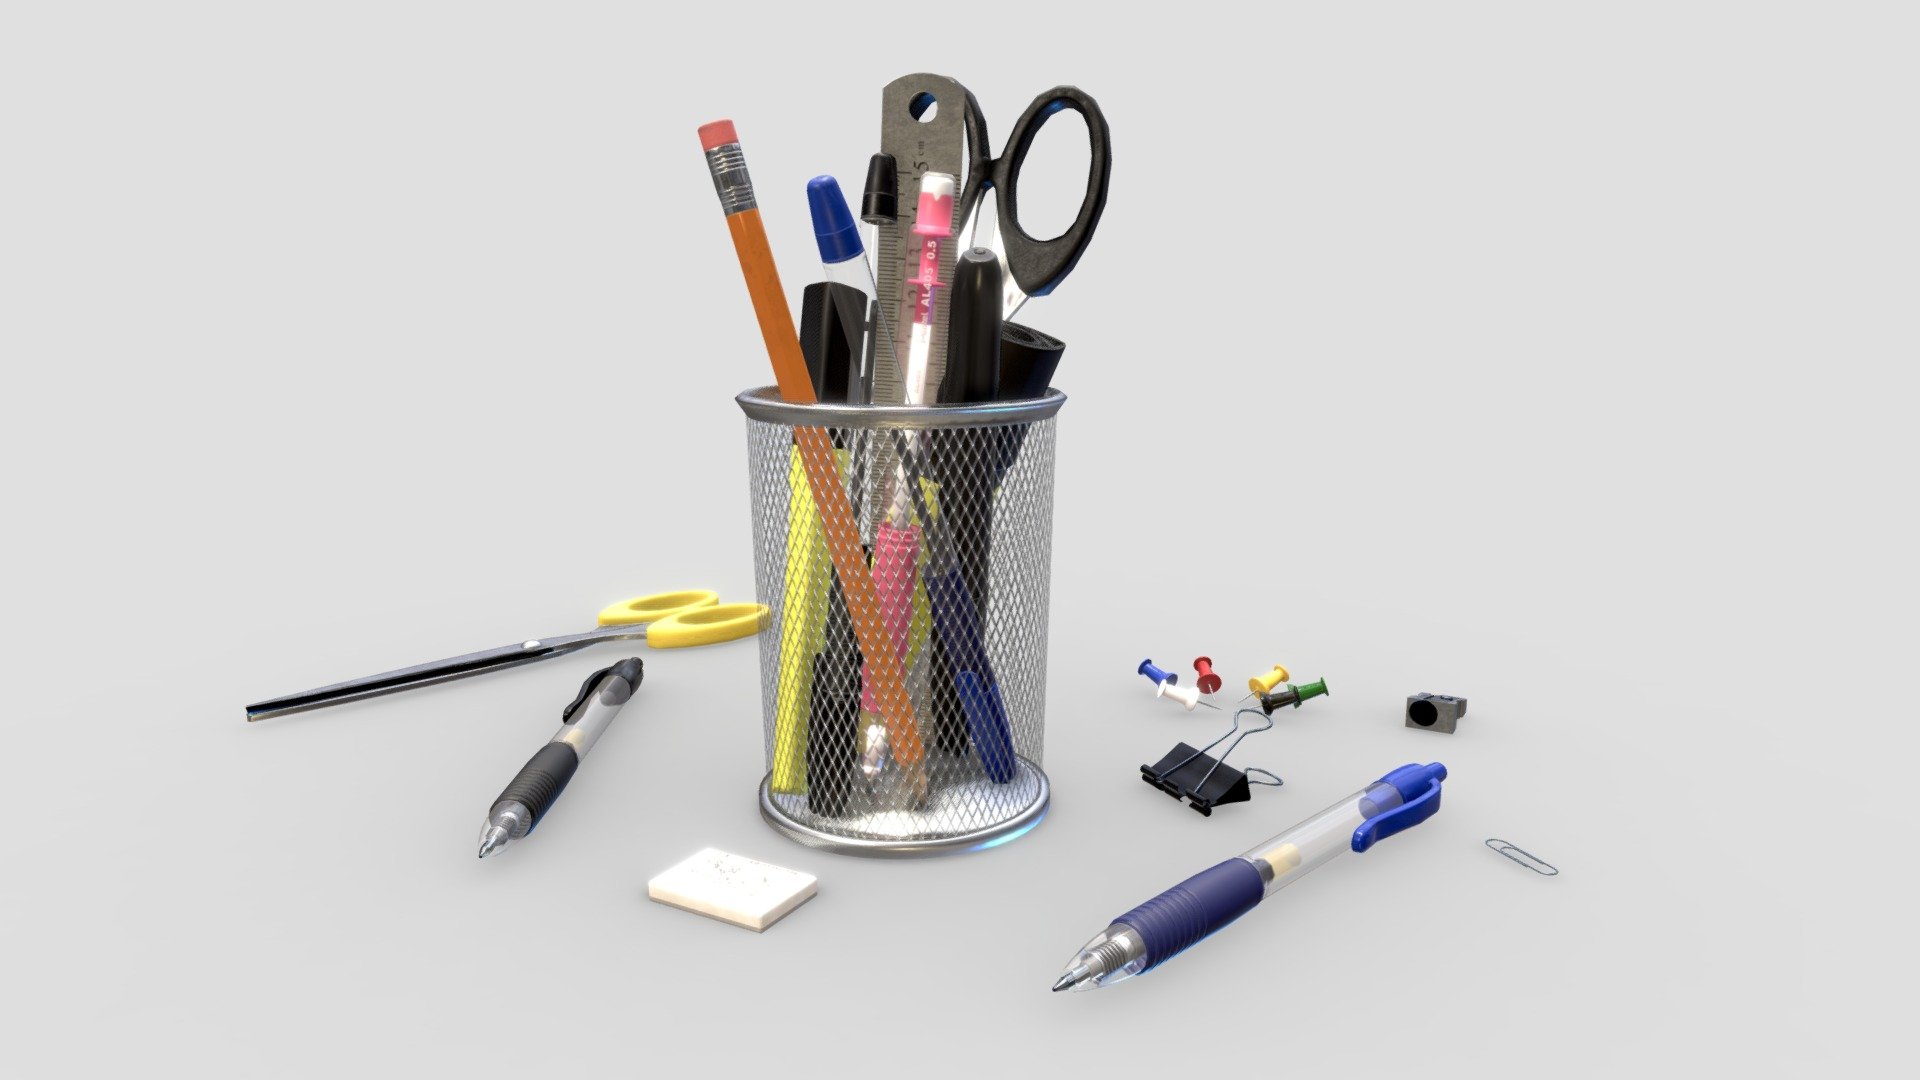 Stationery Collection 3D model with PBR maps 4096x4096 such as: • BaseColor • Metallic • Roughness • Ambient Occlusion • NormalDirectX • 
Model in real scale (meters) - Stationery Collection Low-poly 3D model - Buy Royalty Free 3D model by Andrew.Maria 3d model